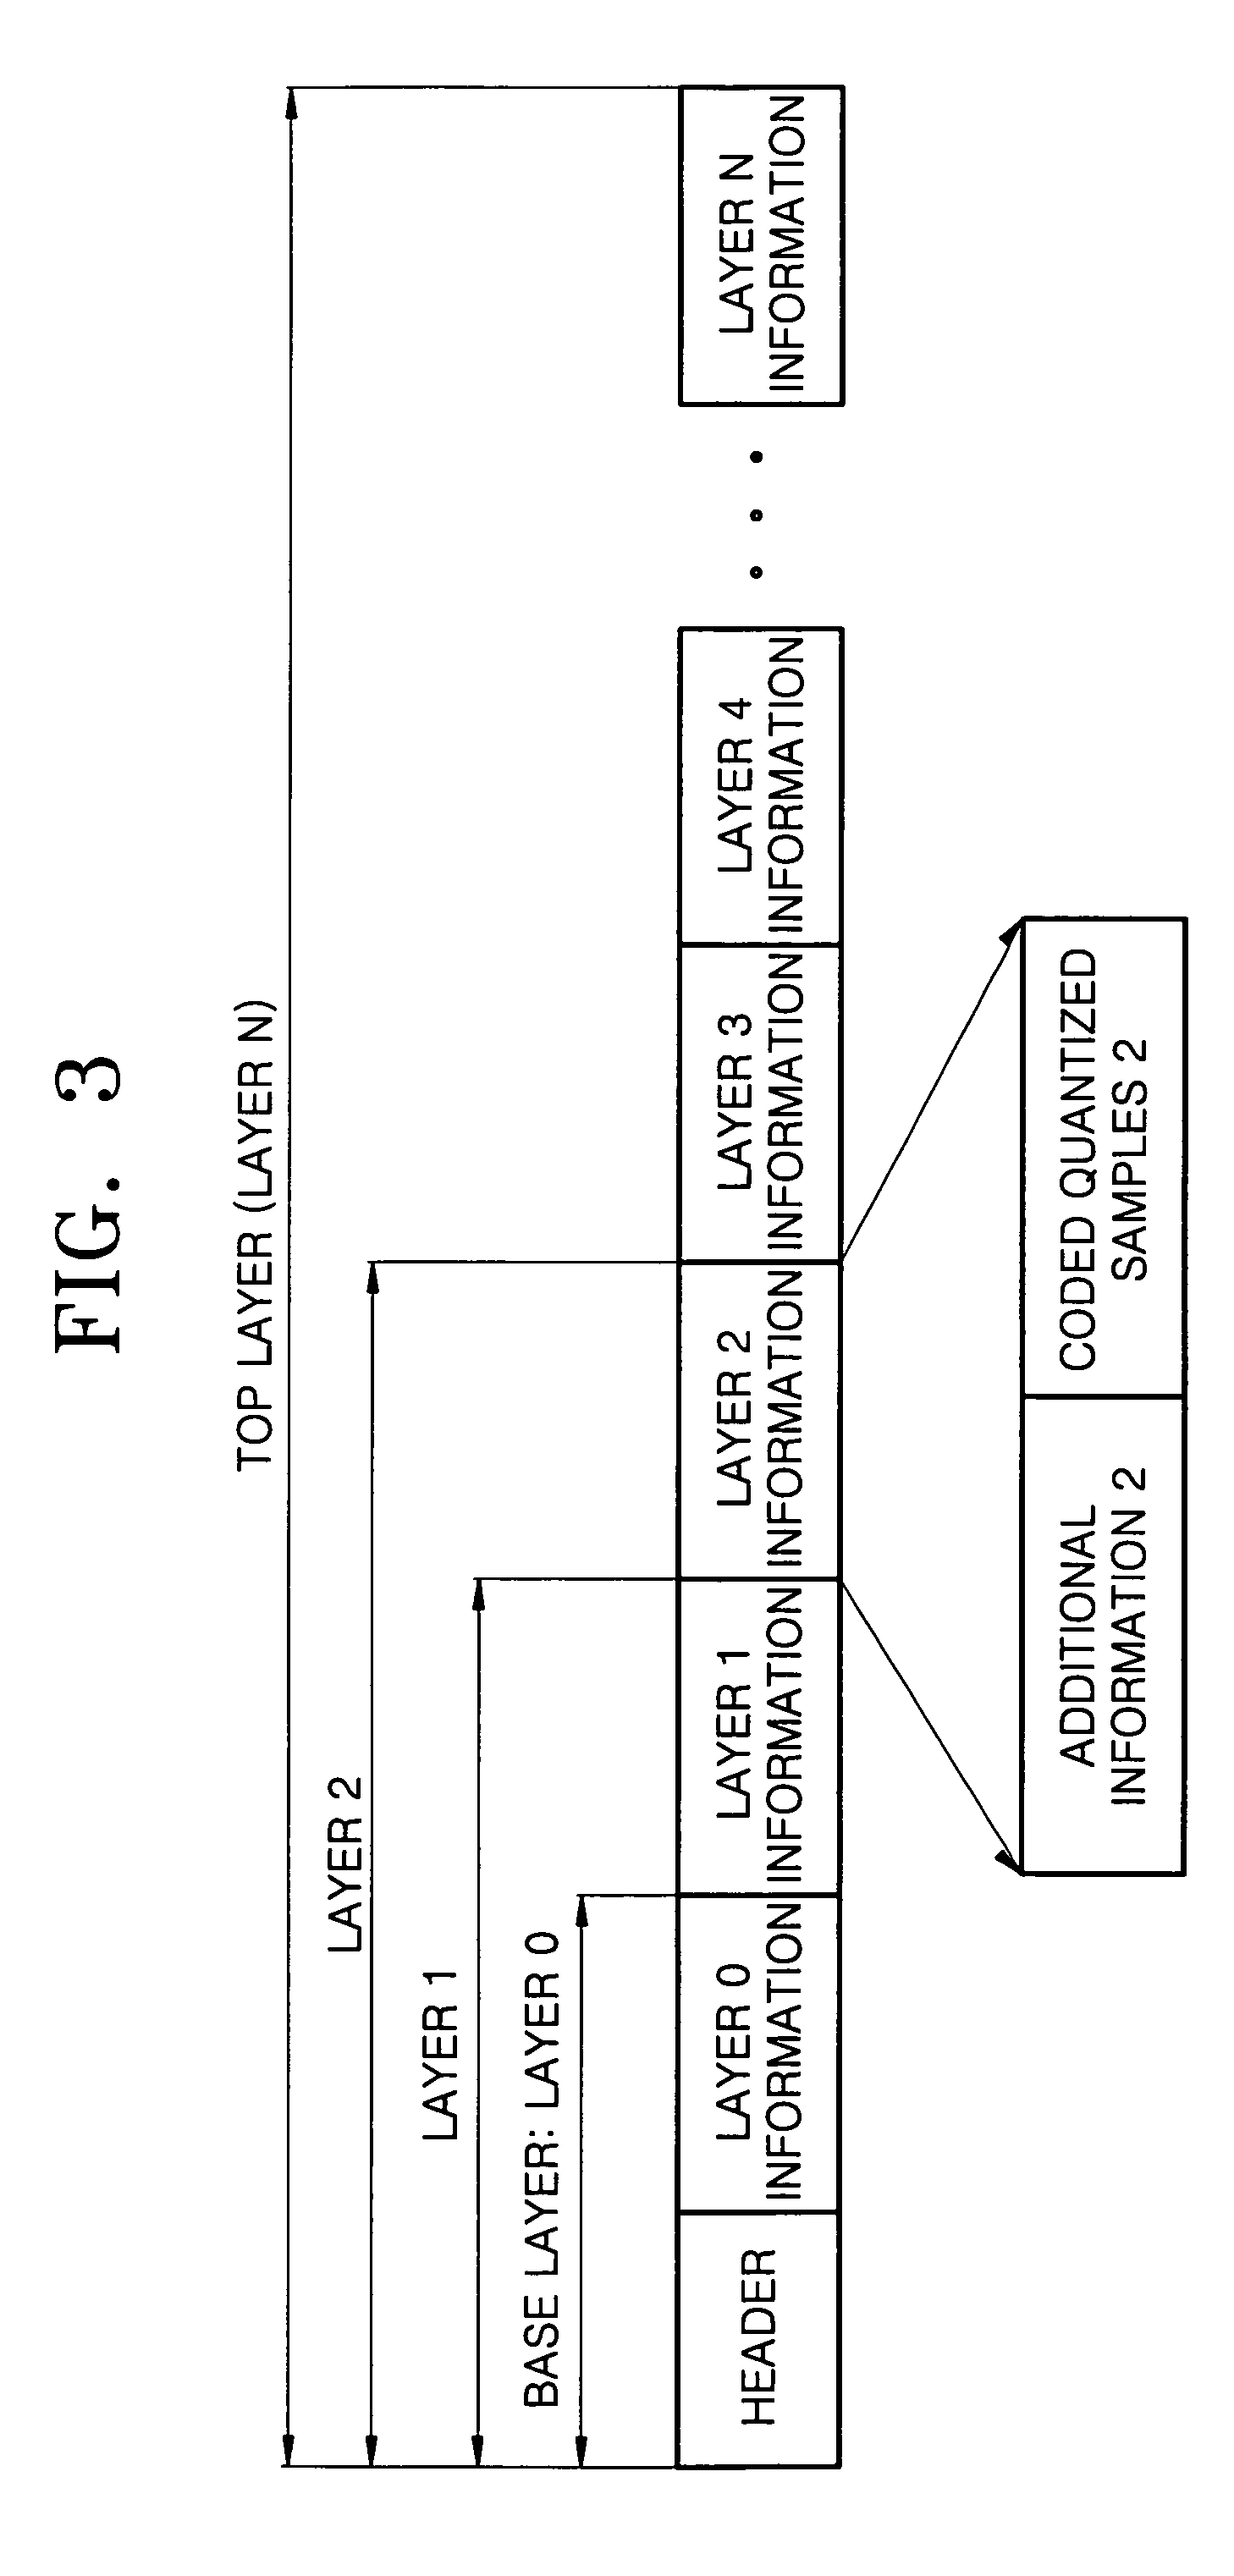 Scalable stereo audio coding/decoding method and apparatus